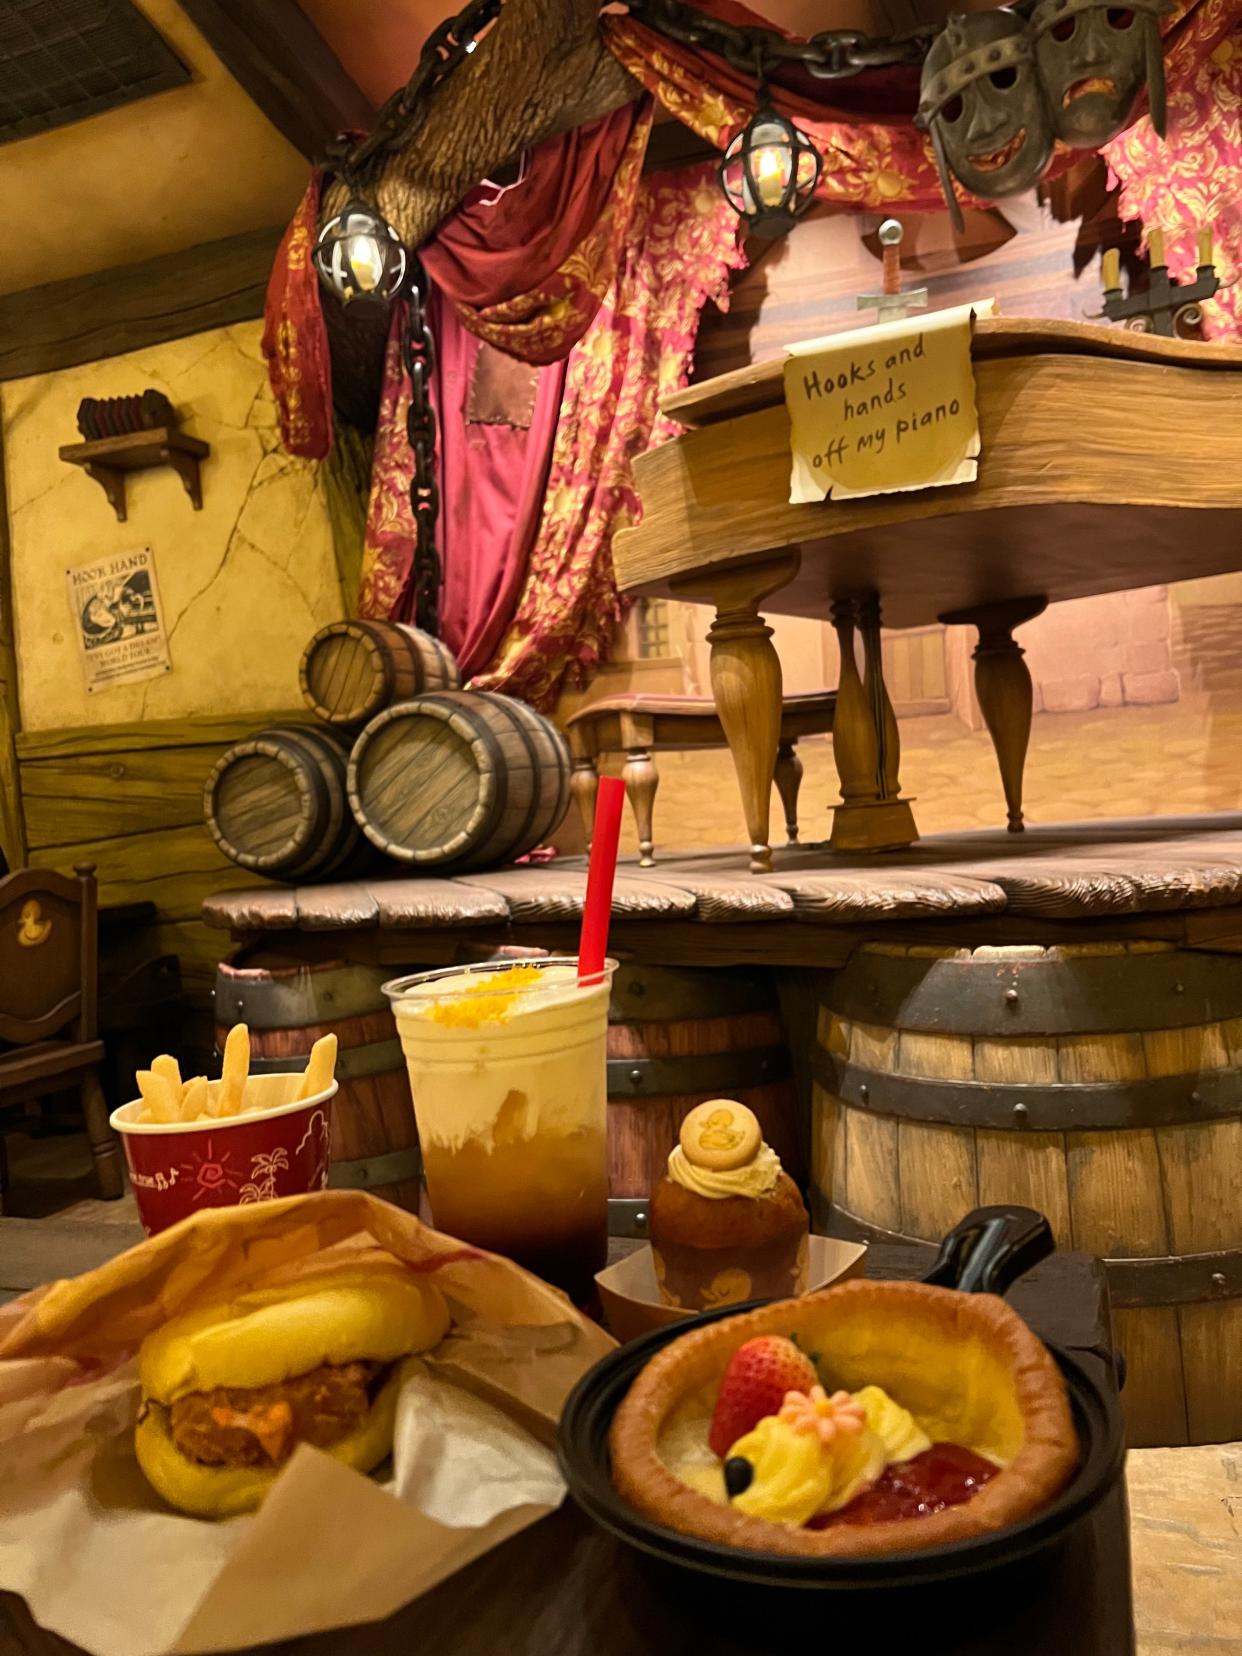 Guests can dine in The Snuggly Duckling, just like in "Tangled."